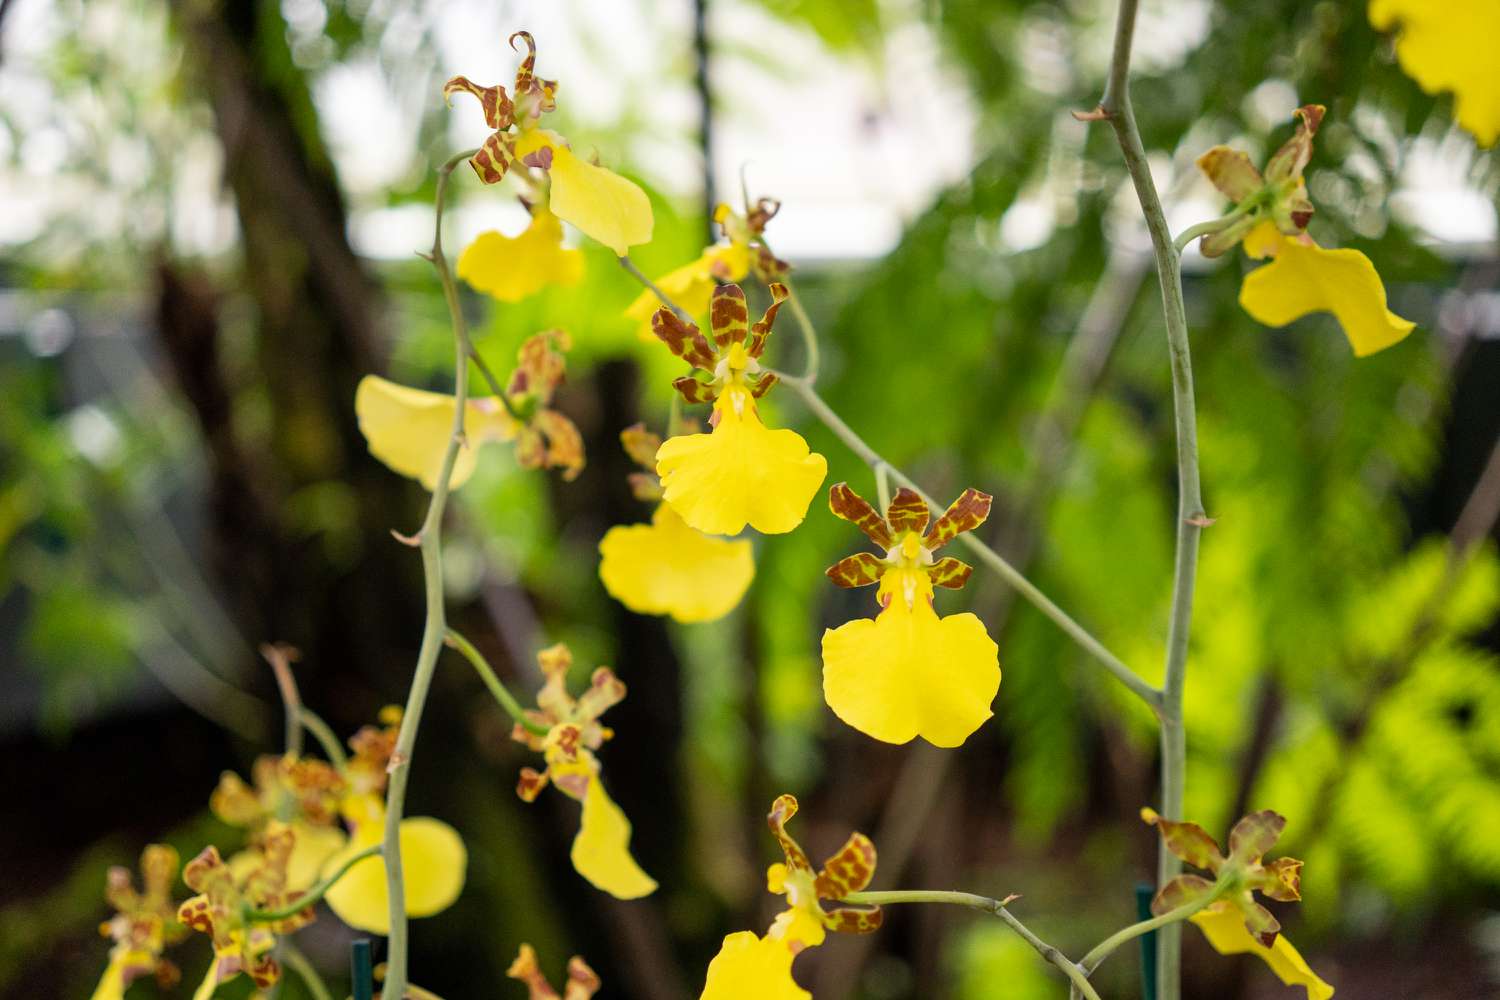 Trichocentrum orchids with bright yellow lip and burgundy patterned petals on thin stems 